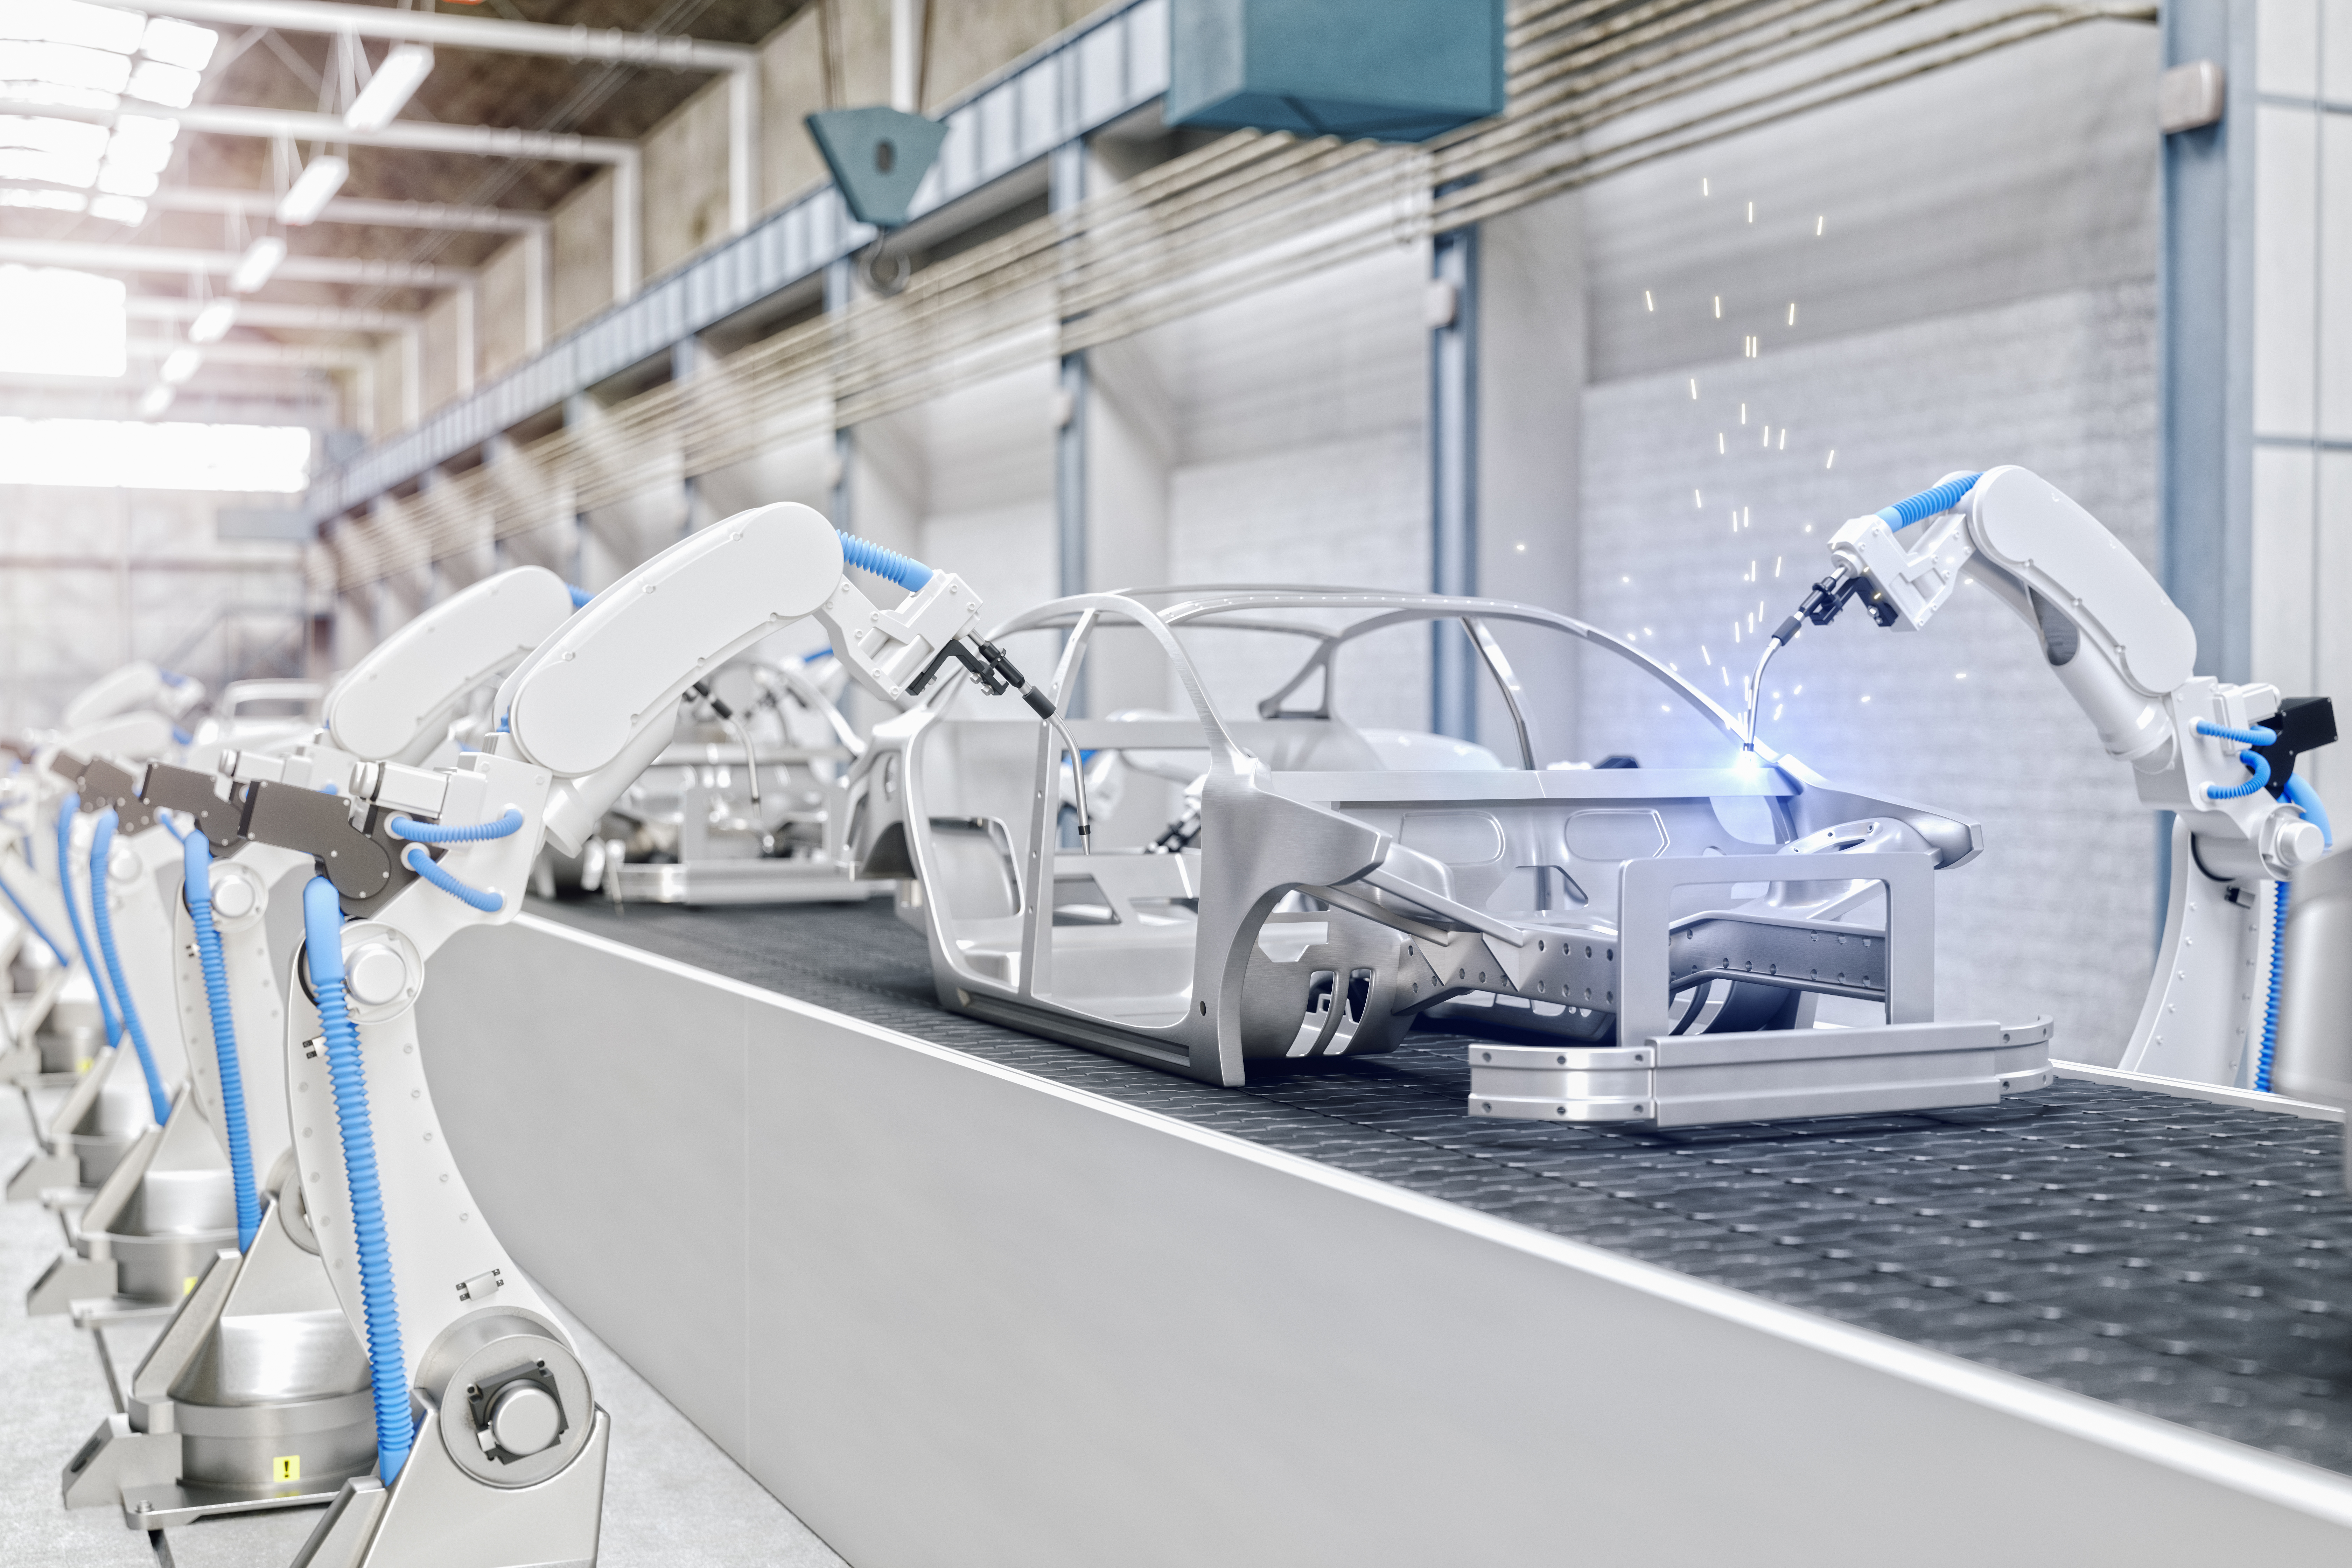 Industrial Robots At The Automatic Car Manufacturing Factory Assembly Line